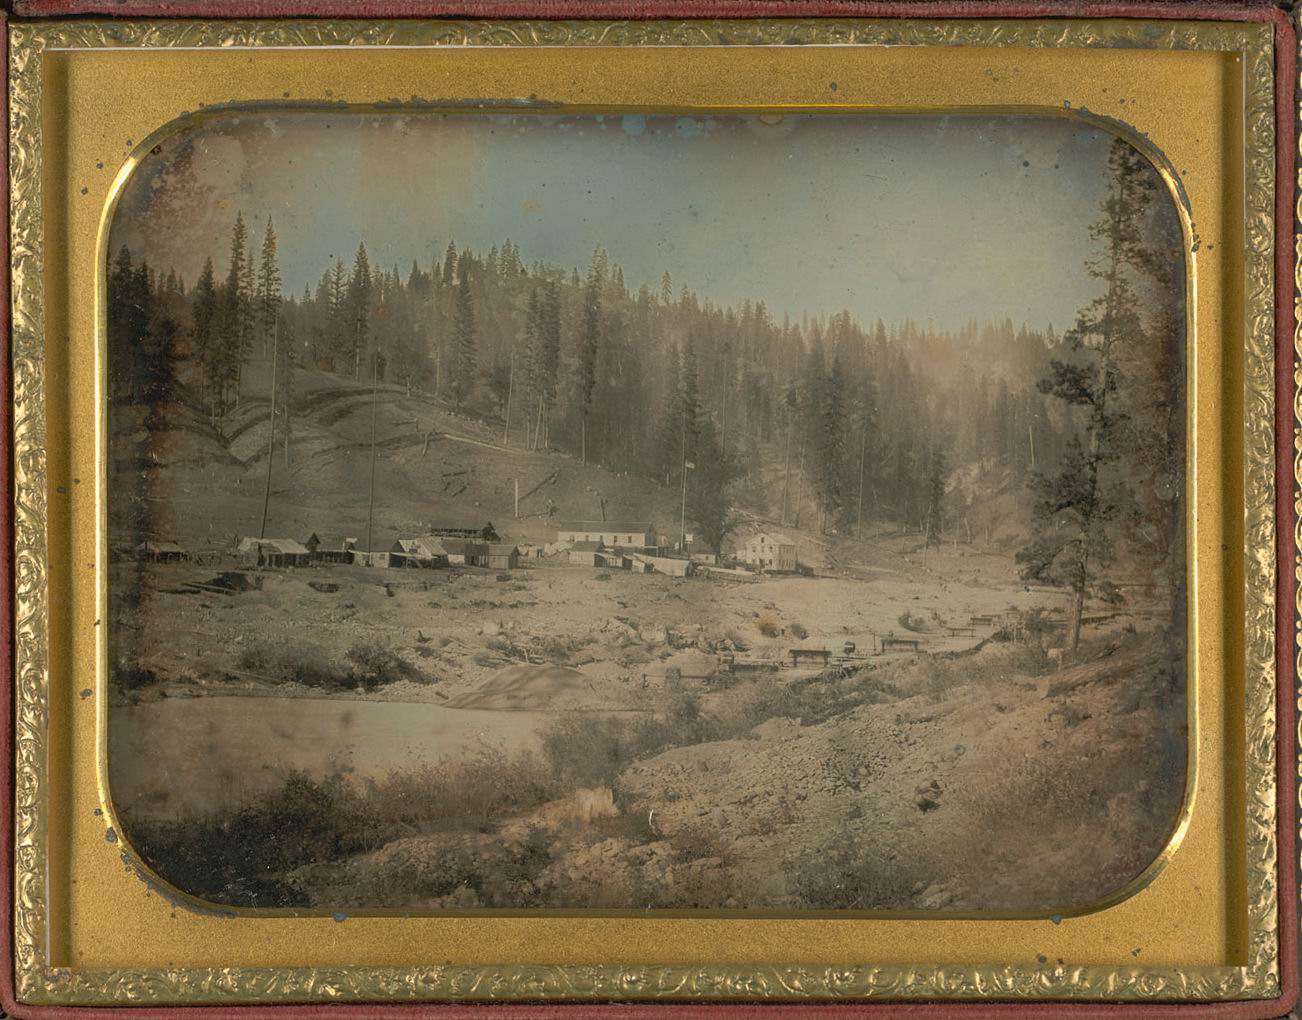 Grizzly Flat settlement